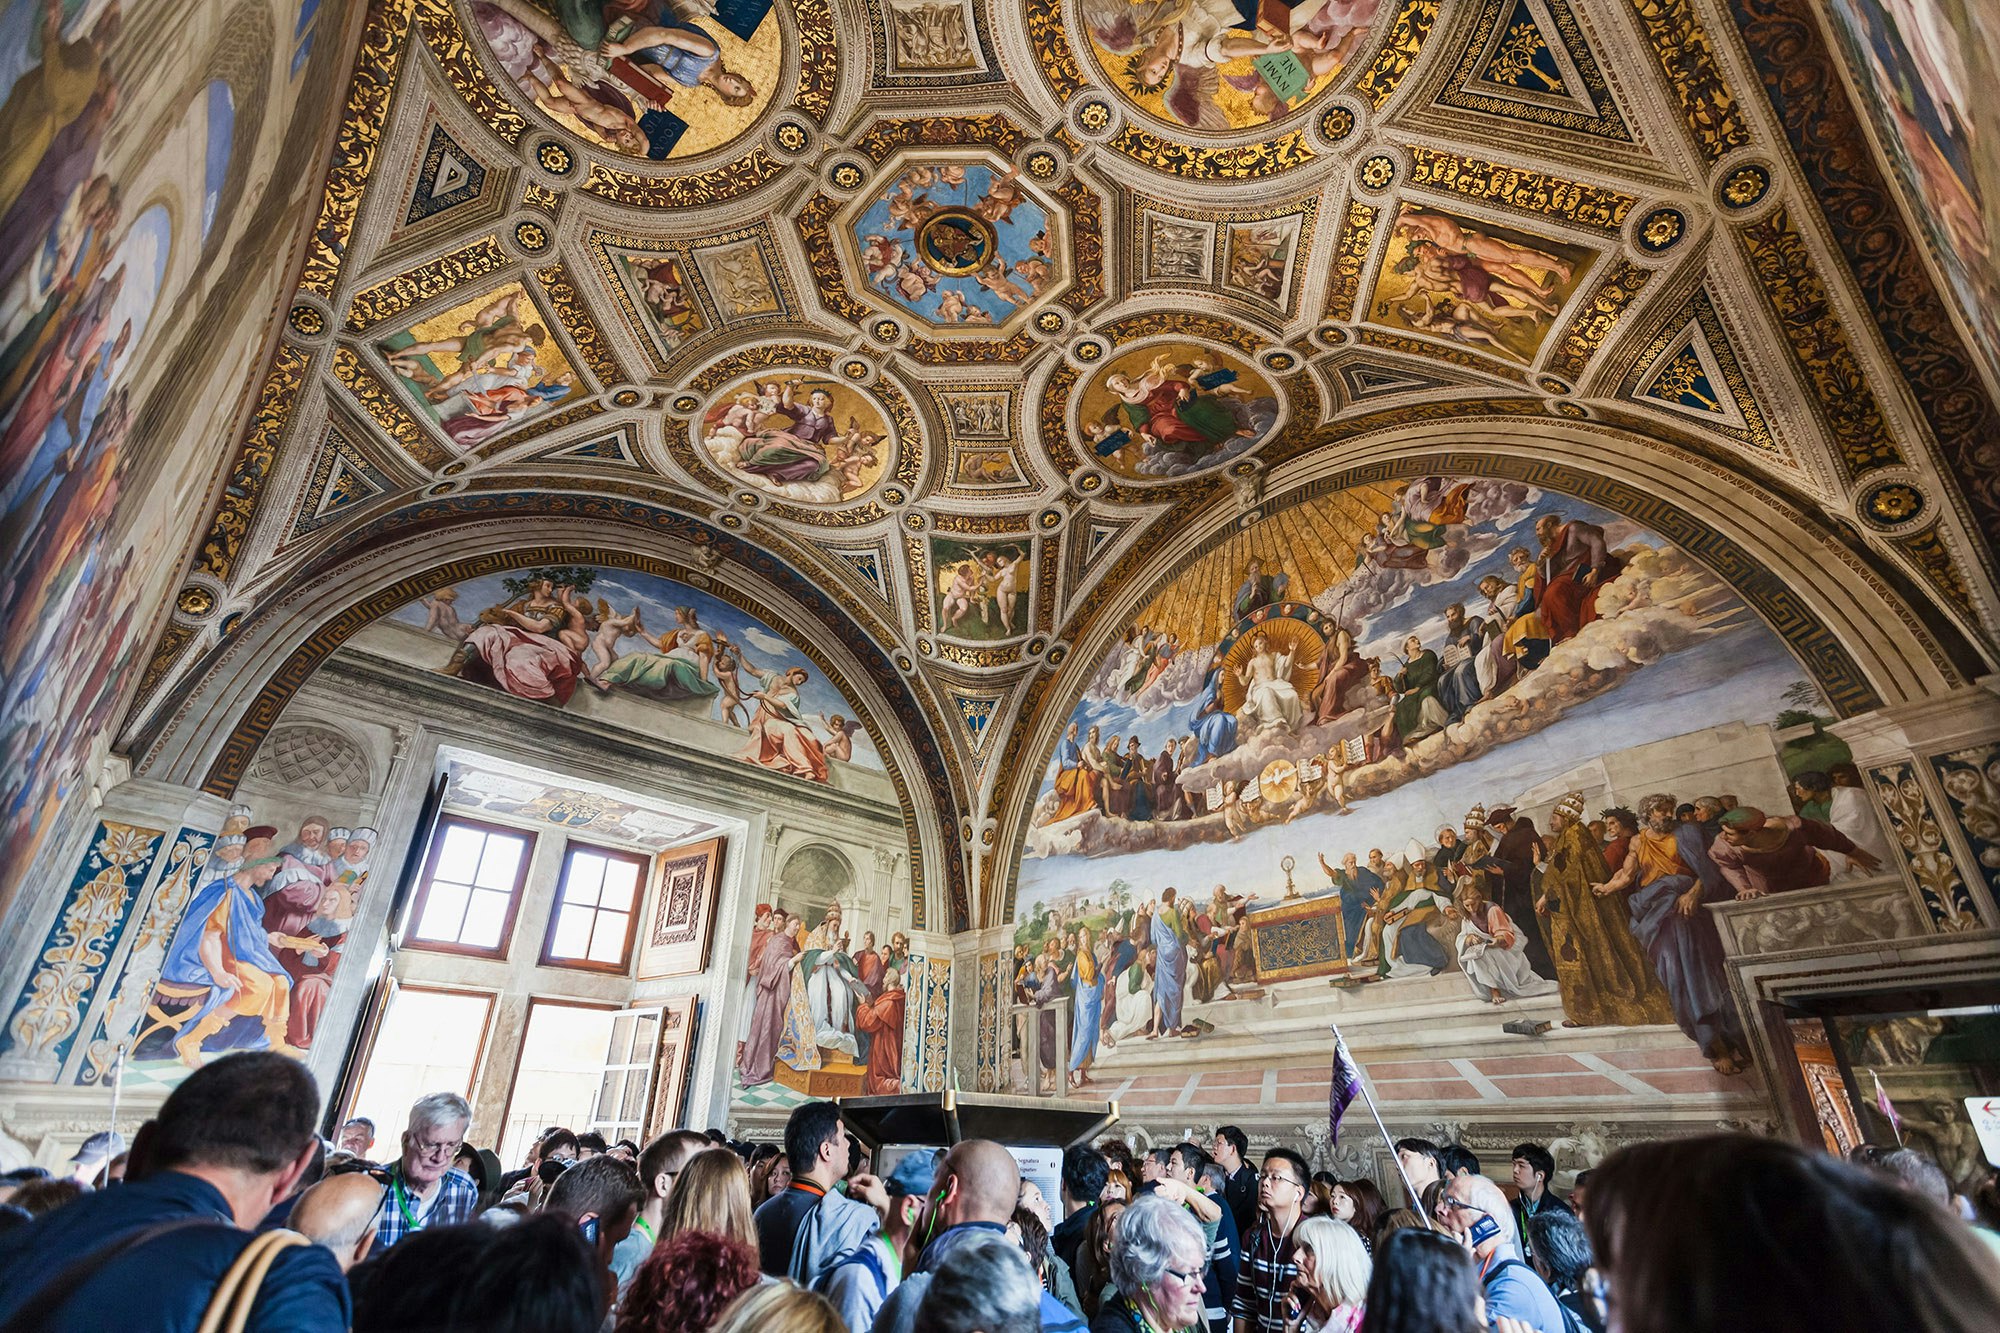 Visitors in Stanza della segnatura decorated by Raphael's frescoes in Raphael Rooms in Vatican Museums